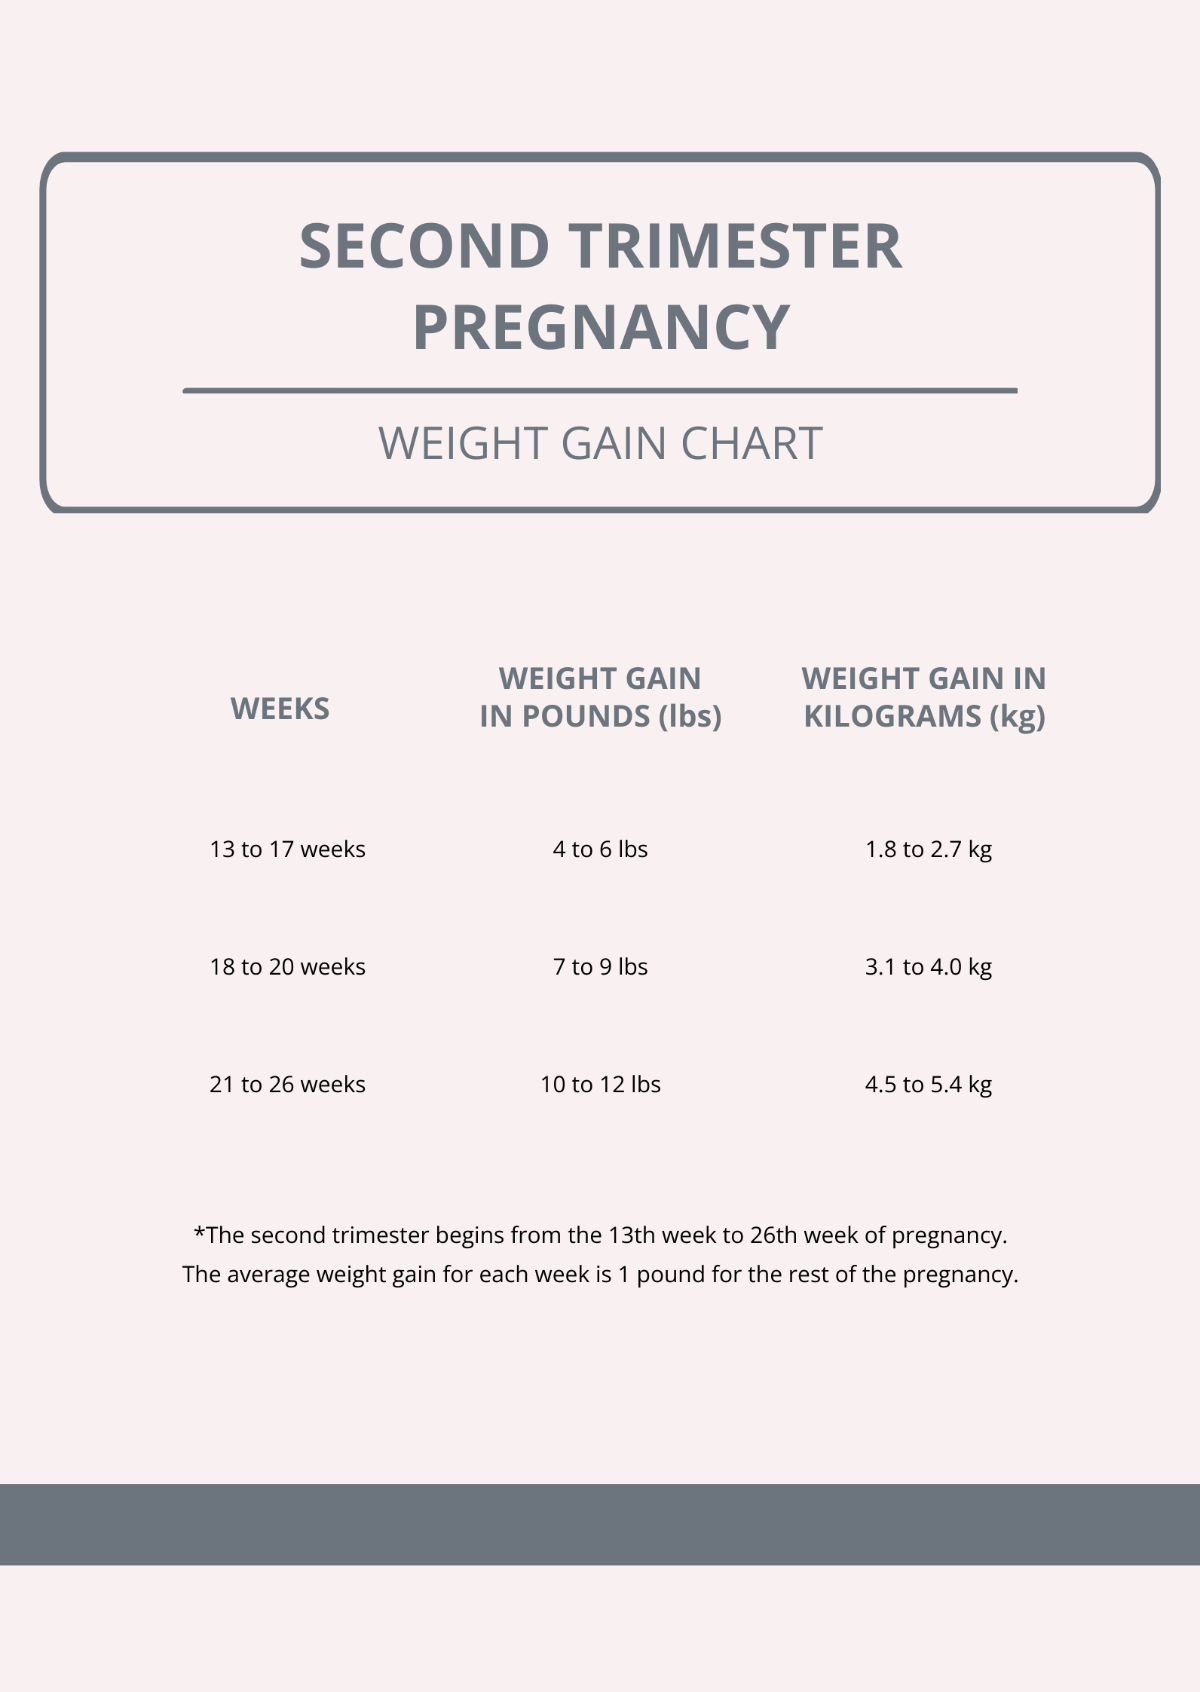 Second Trimester Pregnancy Weight Gain Chart